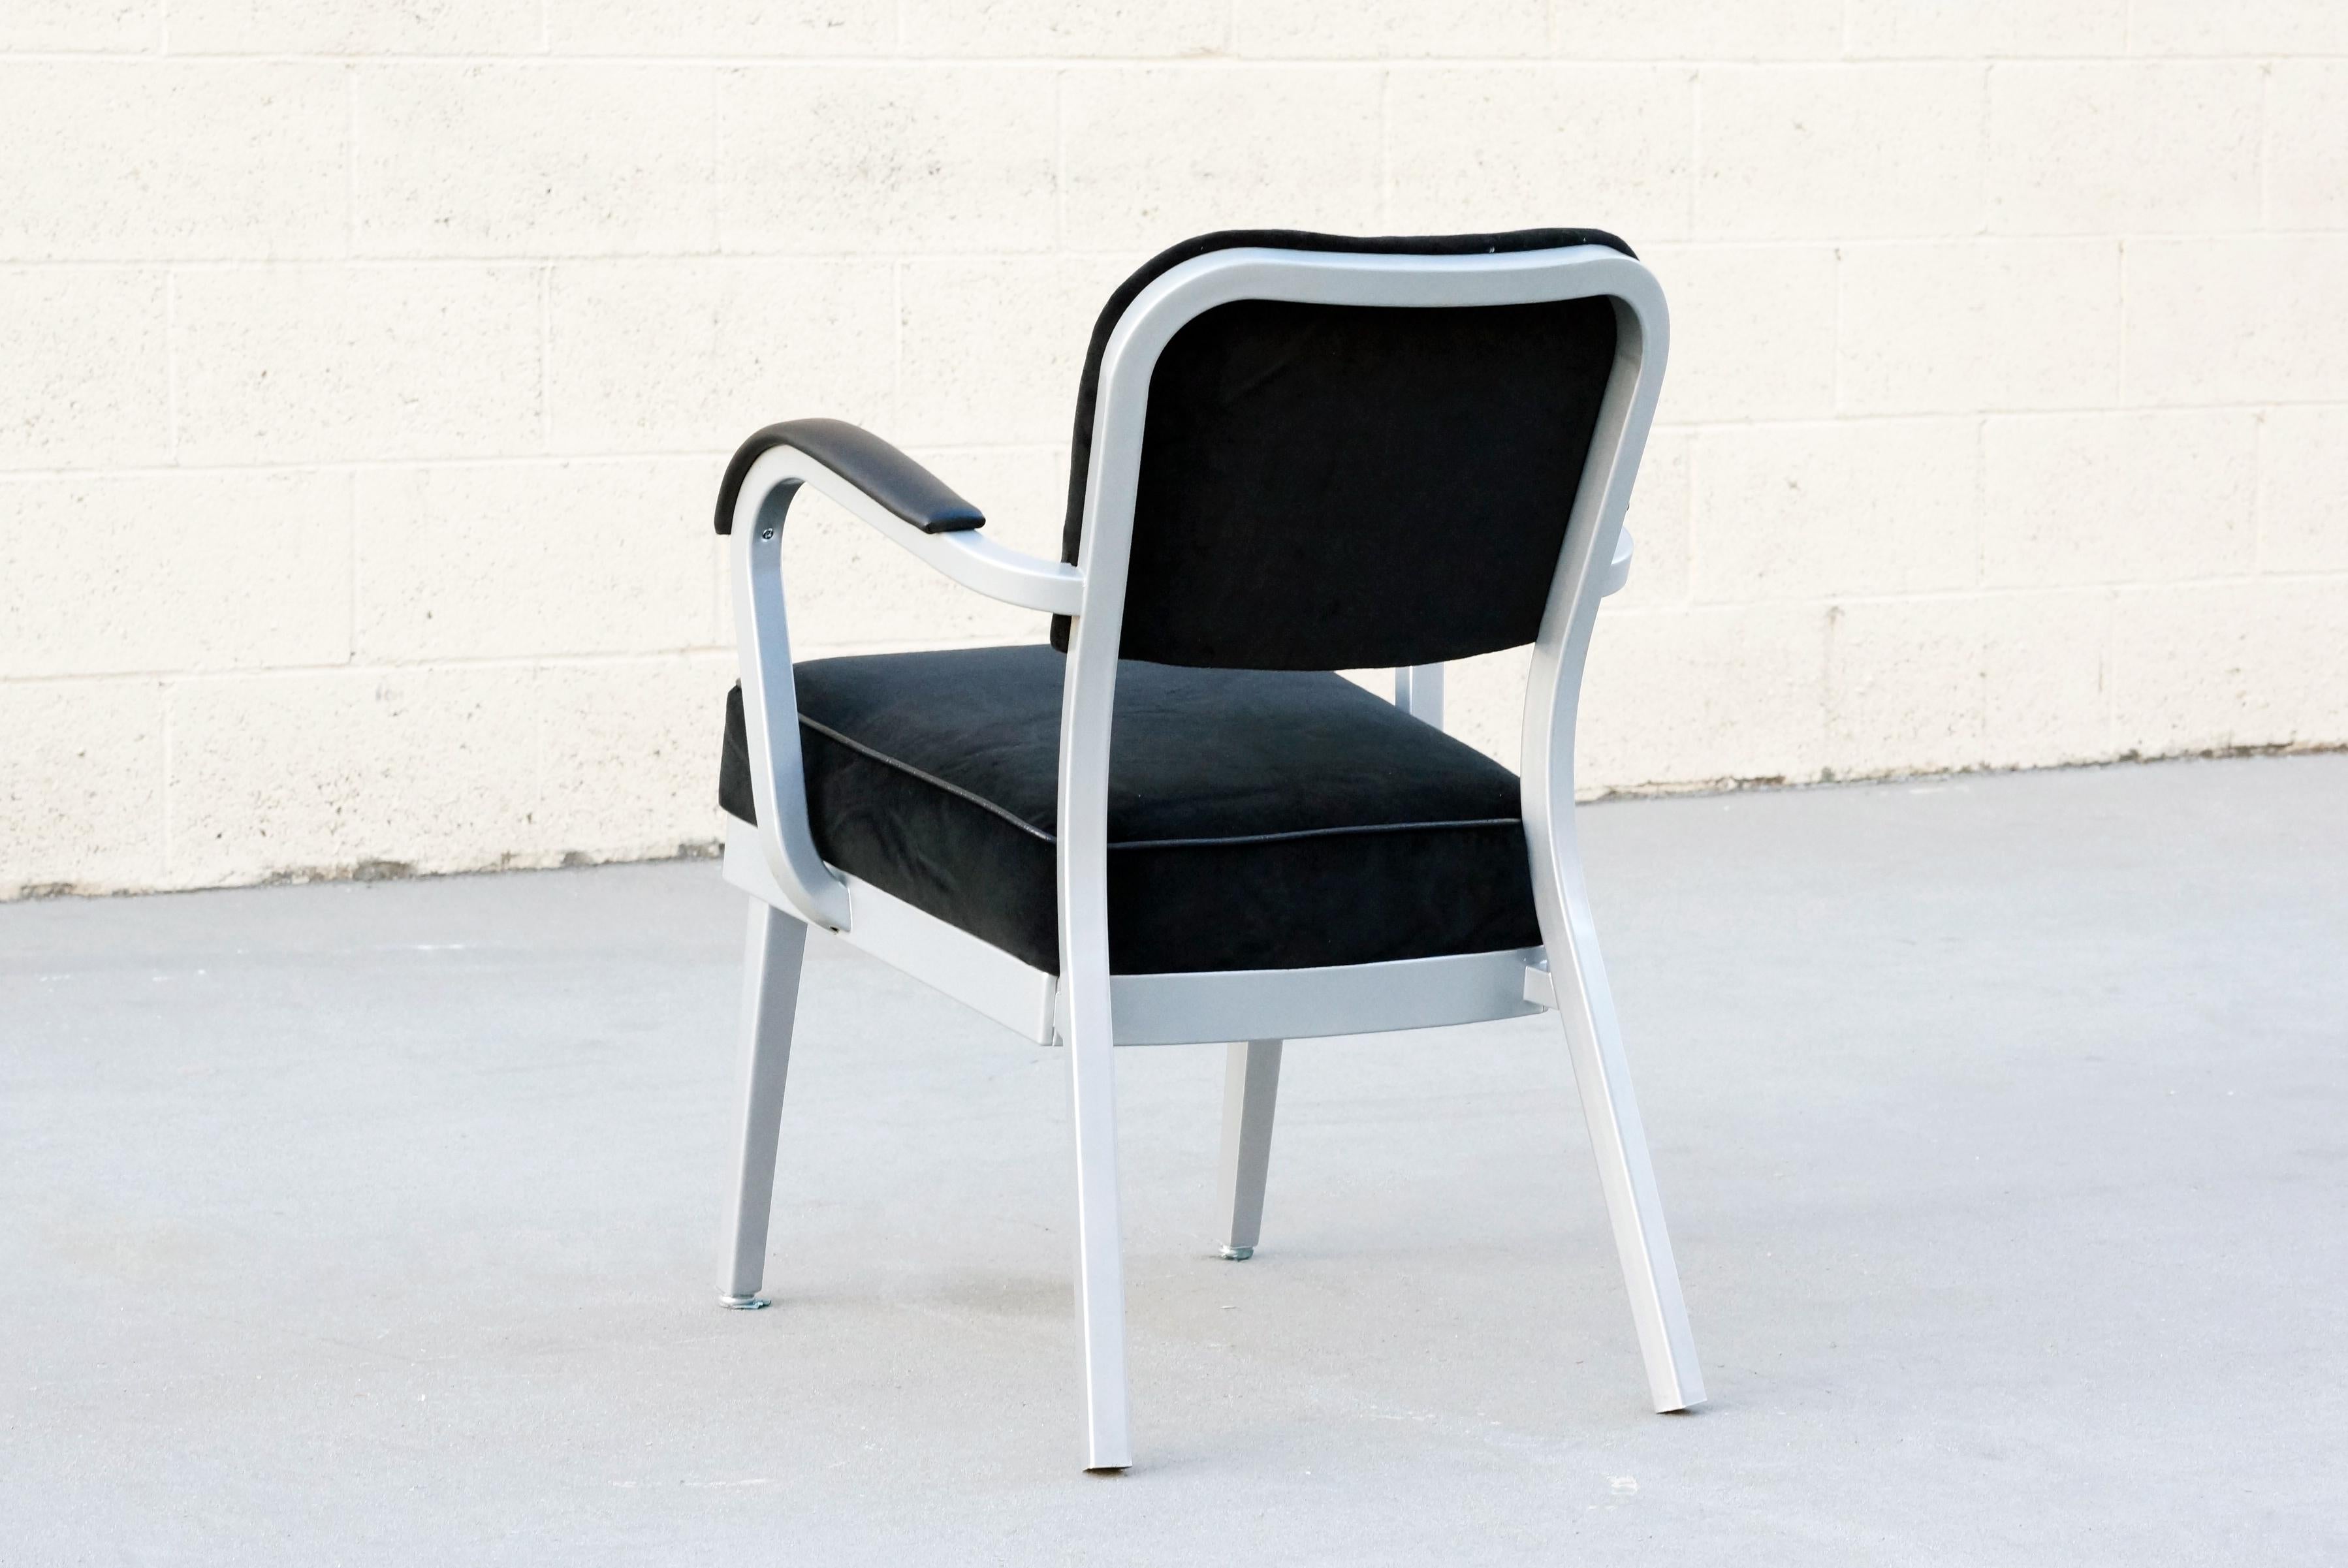 Classic midcentury steel tanker armchair refinished in metallic silver powder-coated frame and reupholstered in black velvet with black vinyl armcaps. 

Dimensions: 24